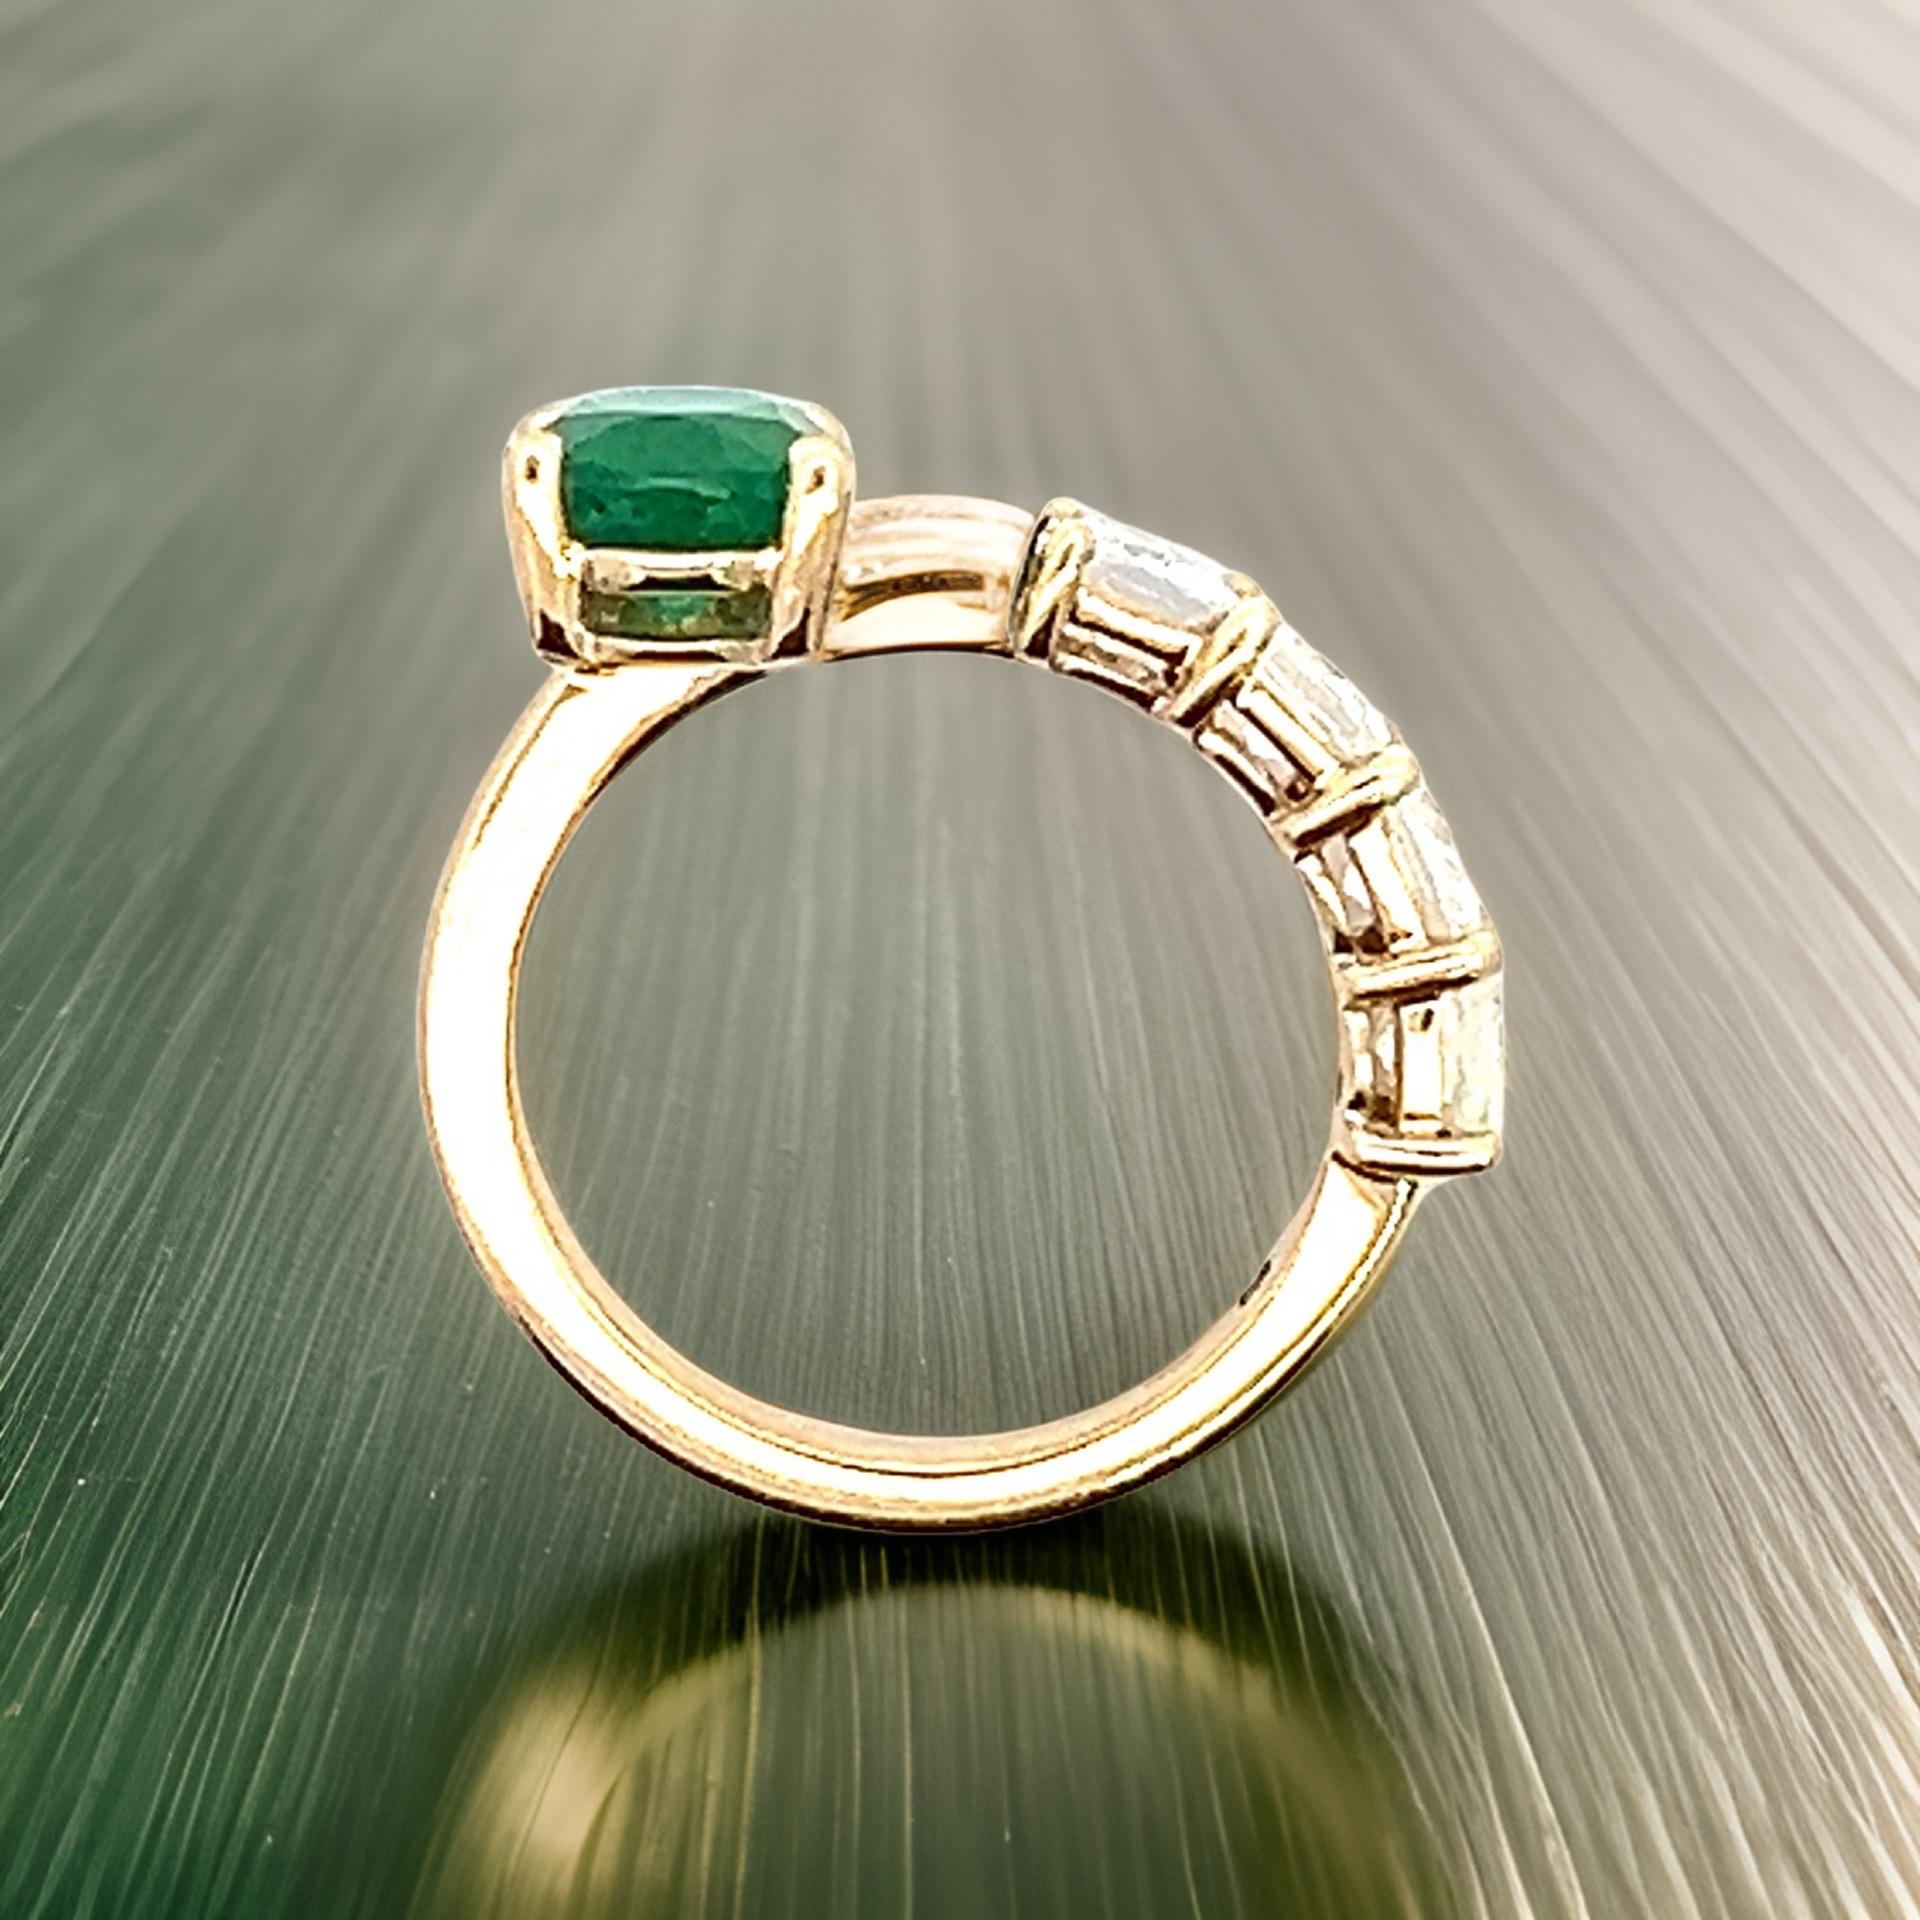 Natural Emerald and White Sapphire Ring 6.5 14k Y Gold 4.05 TCW Certified For Sale 5